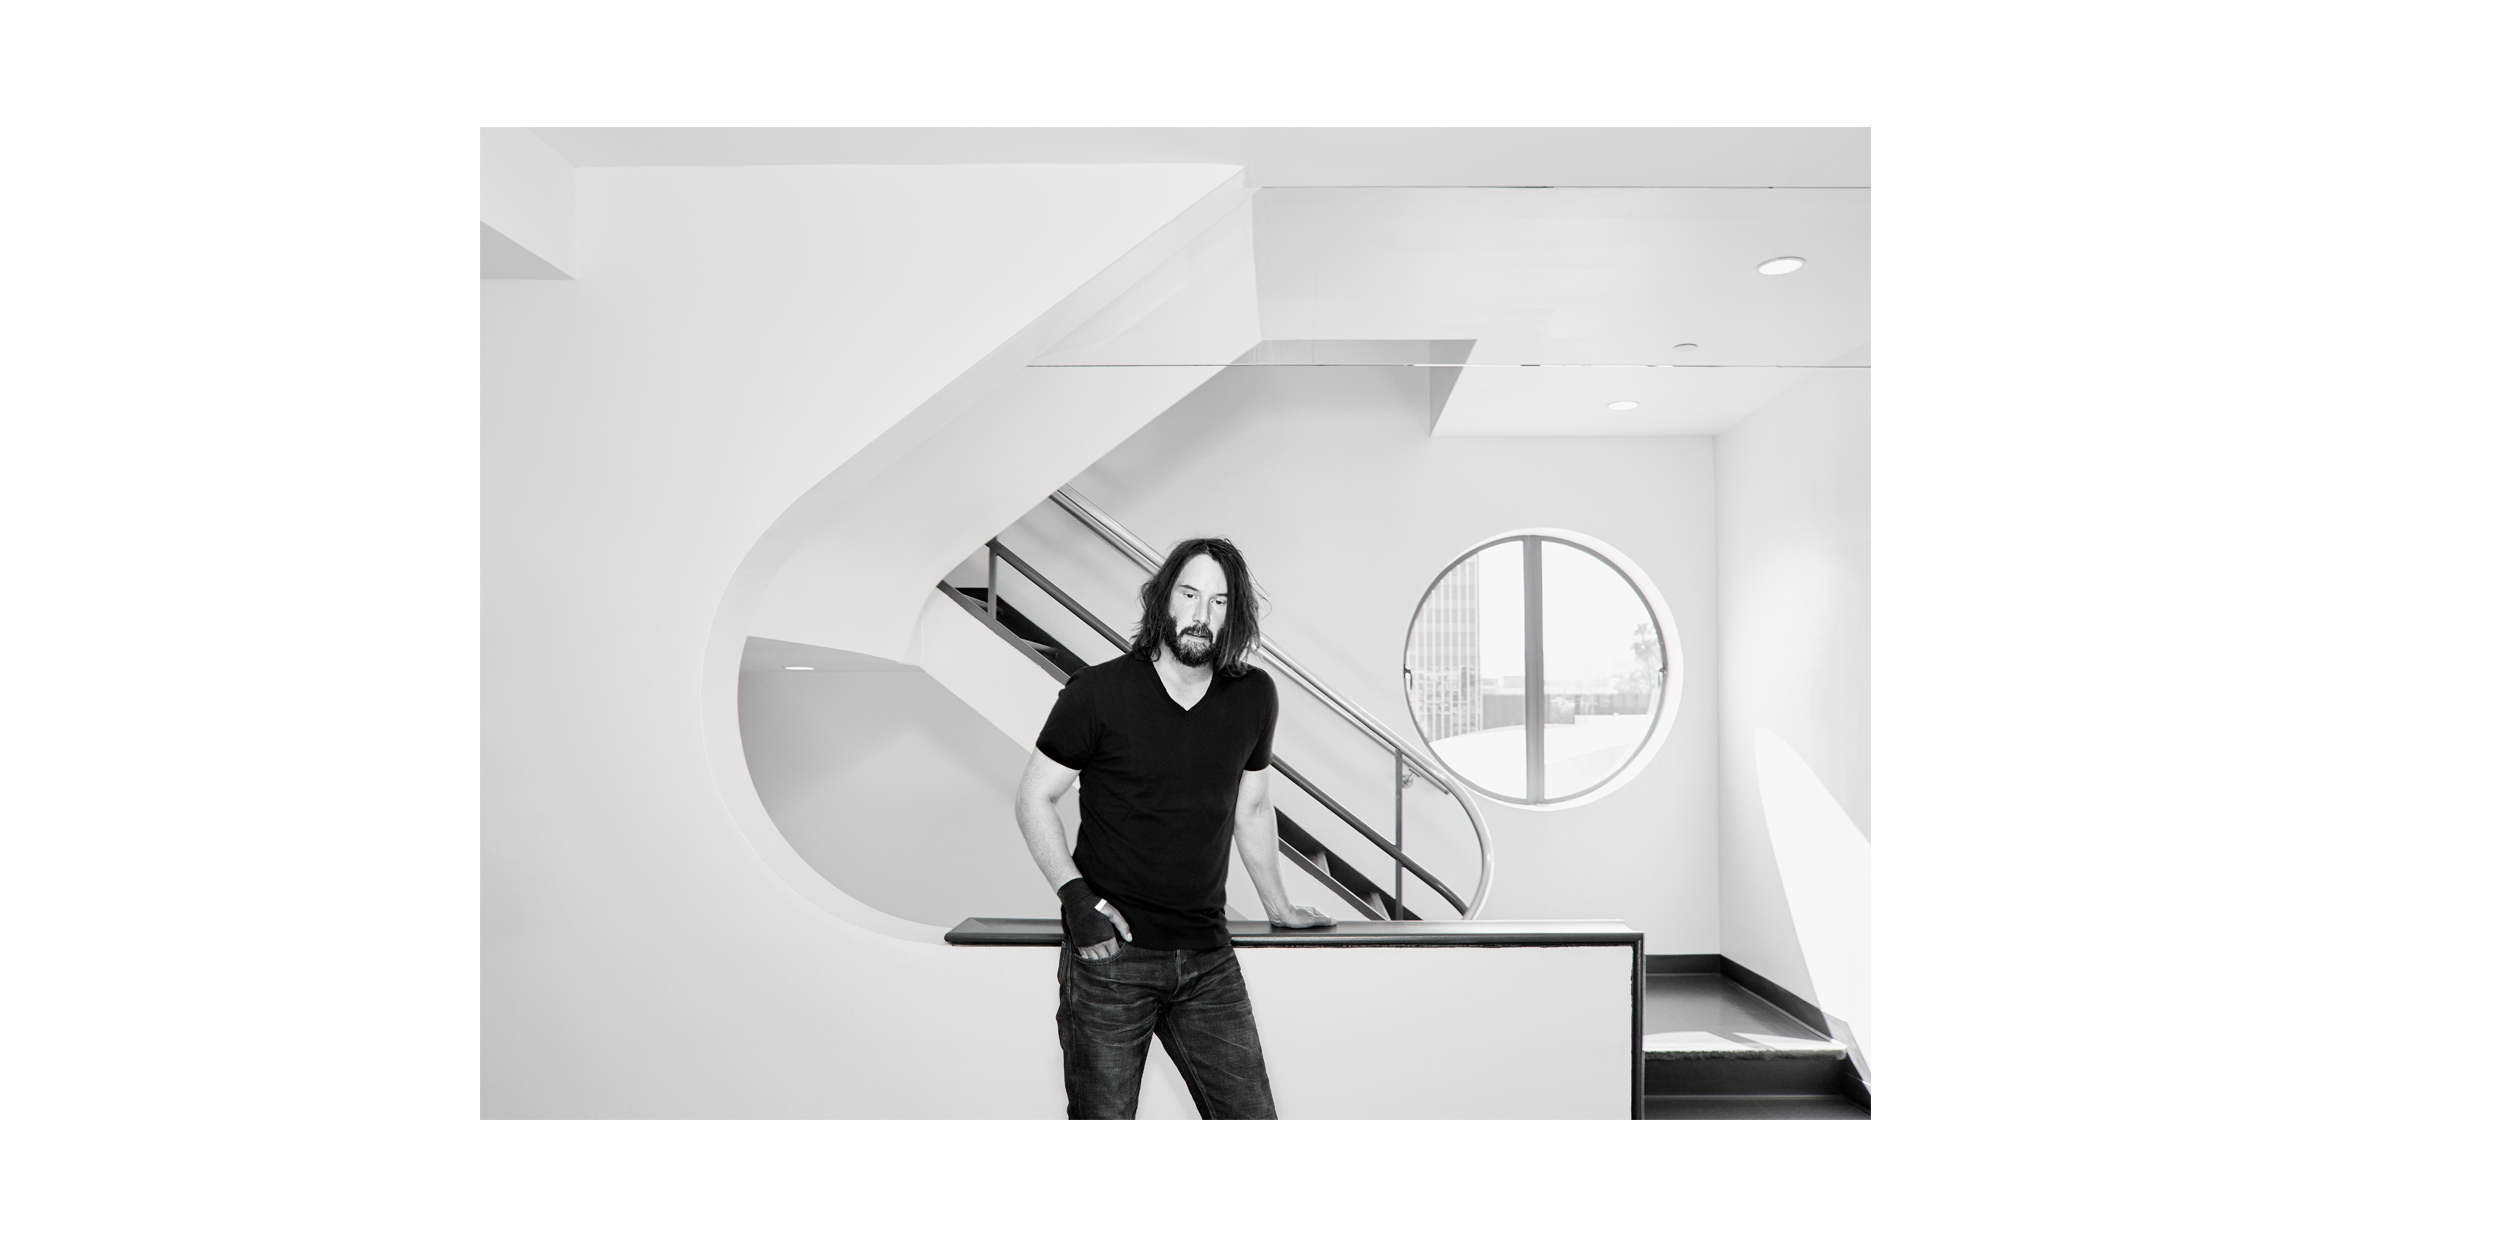  Keanu Reeves - T: THE NYT STYLE MAGAZINE 